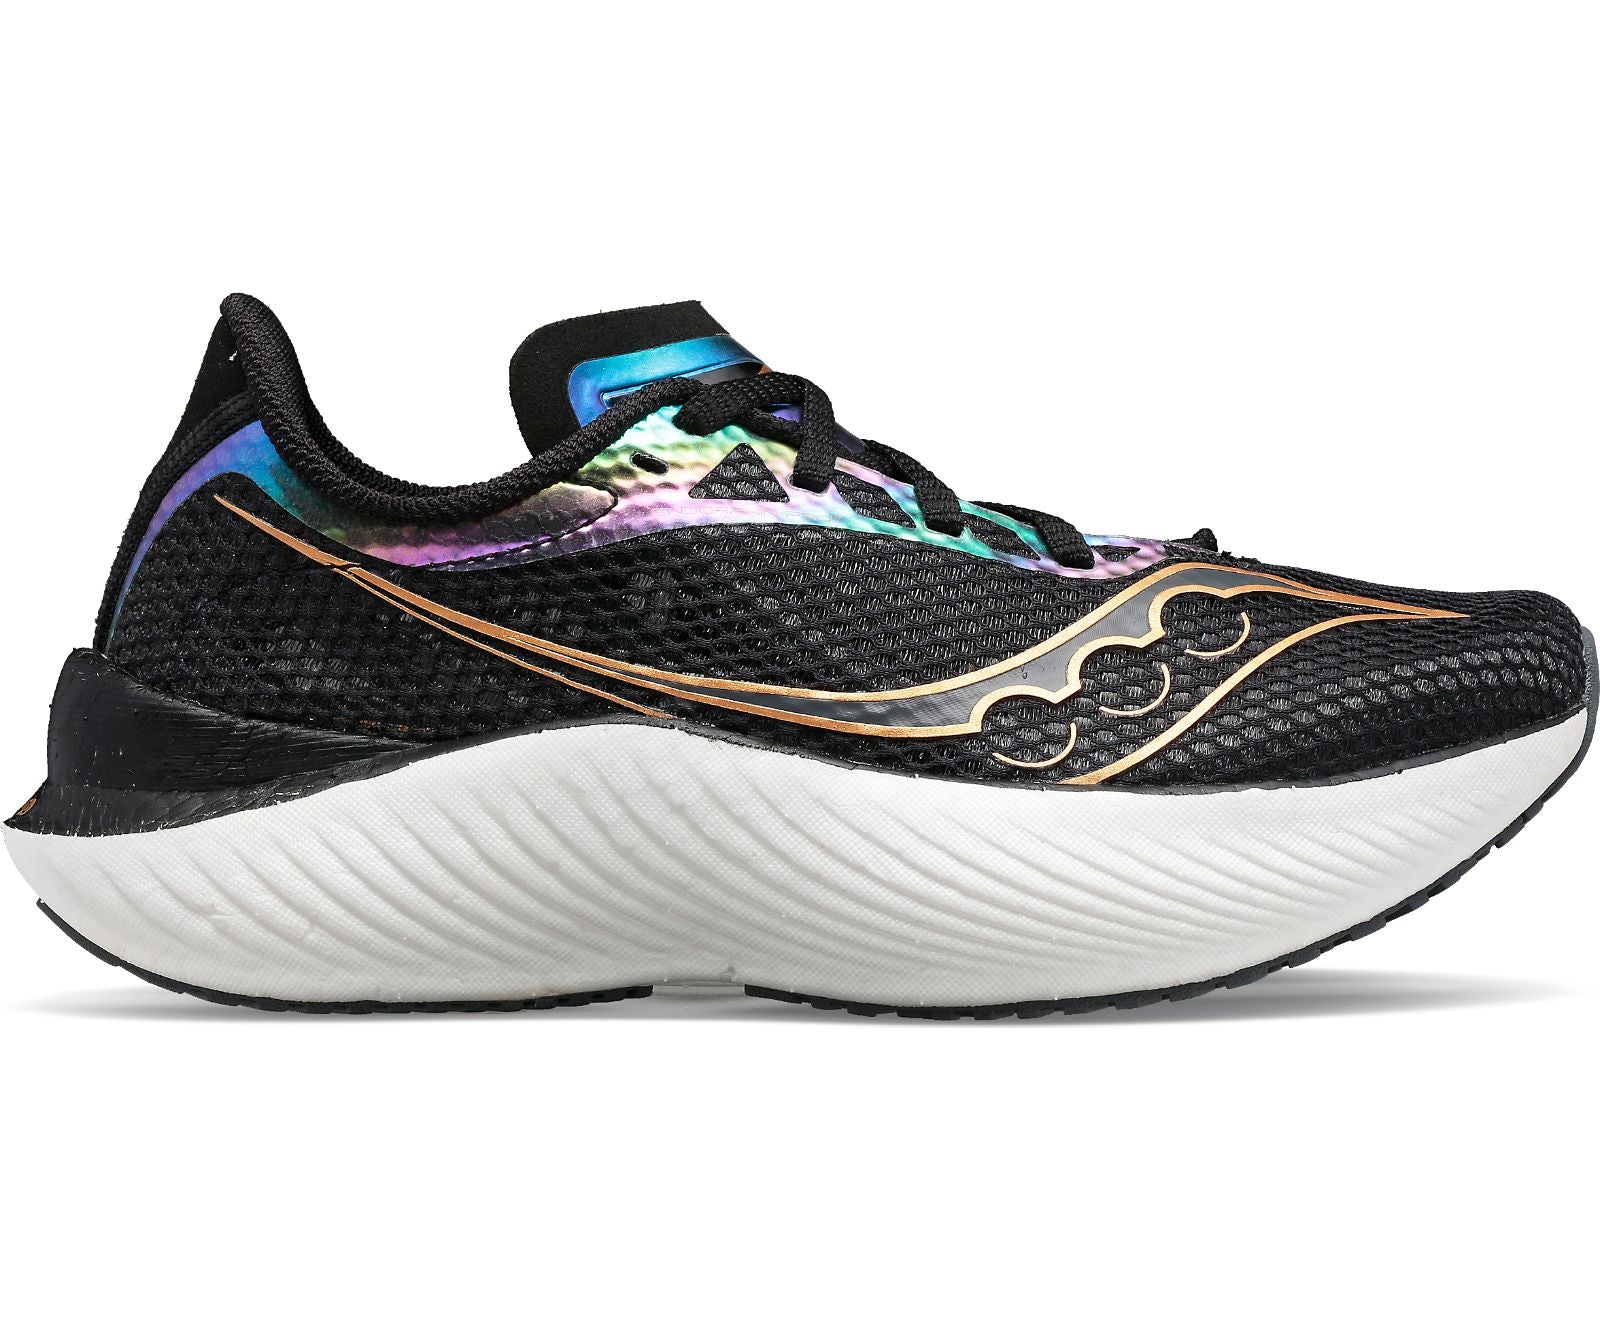 Lateral view of the Men's Endorphin Pro 3 by Saucony in the color Black/Goldstruck